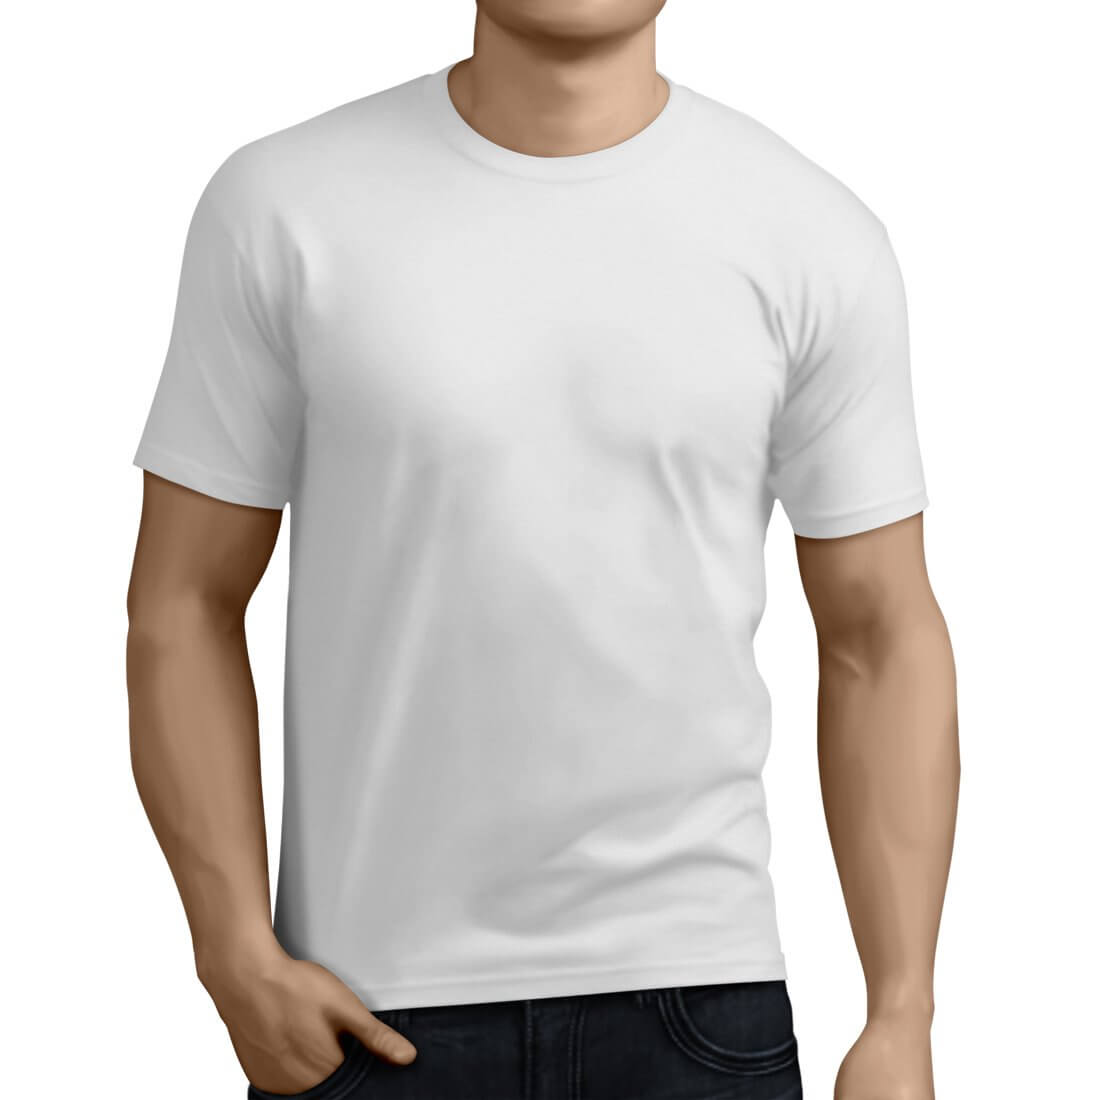 Polyester T-Shirt Personalized for Men - Buy Unique Gifts Online in ...